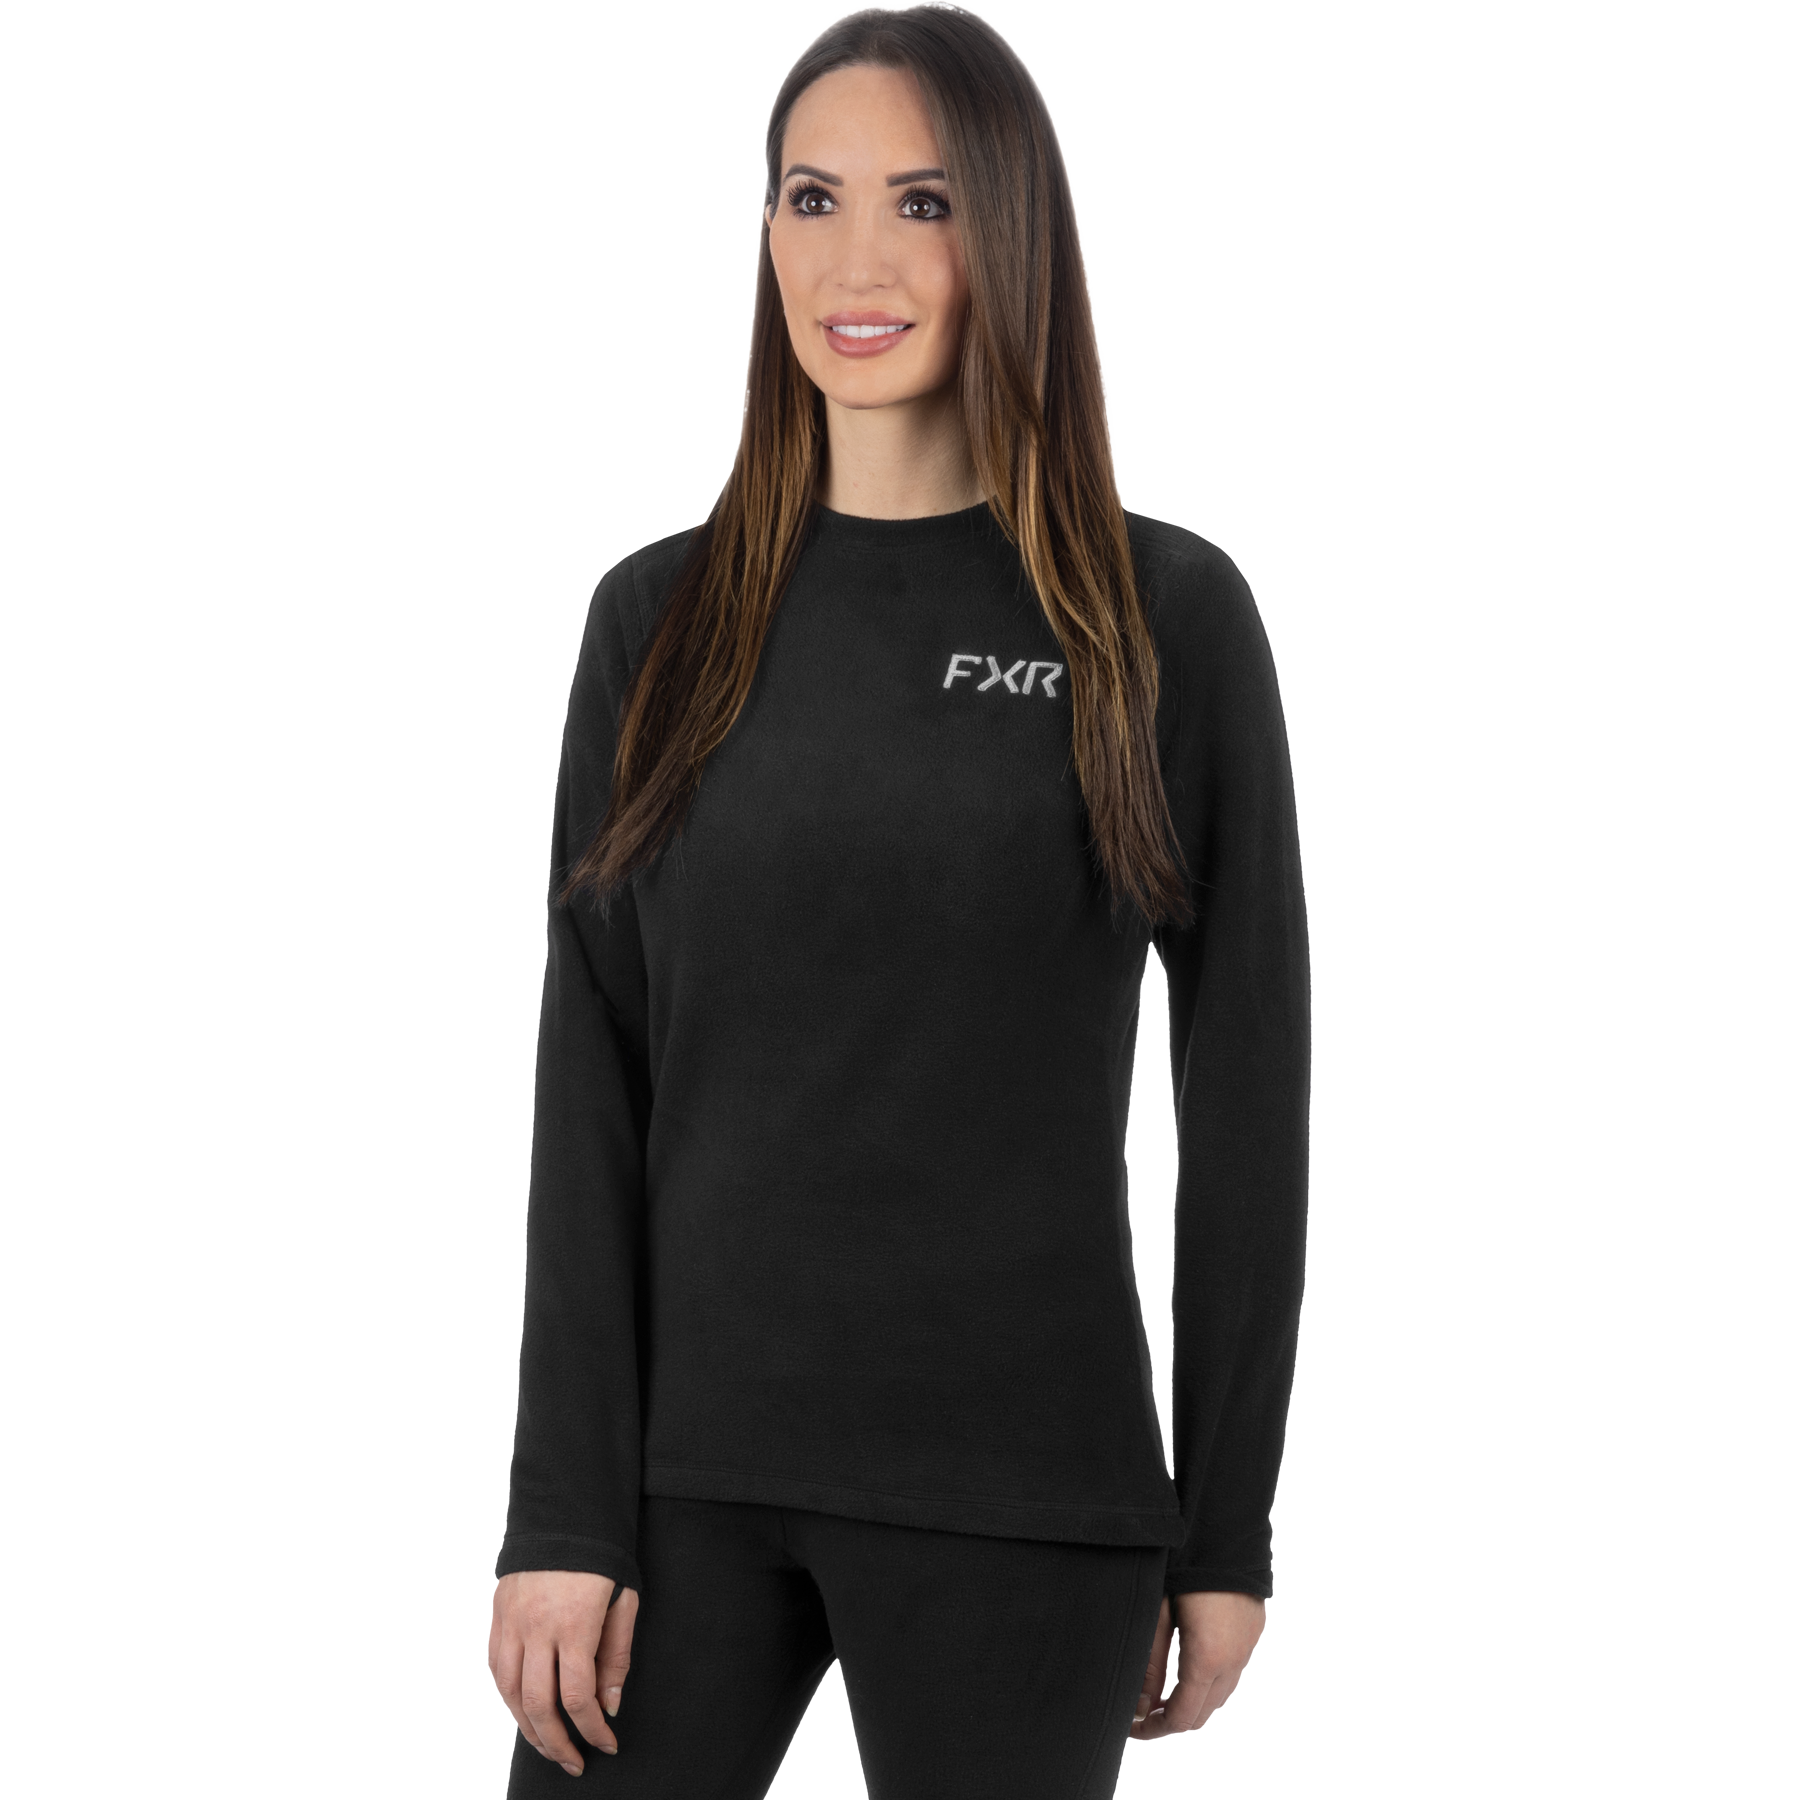 fxr racing top baselayers for womens pyro thermal longsleeve